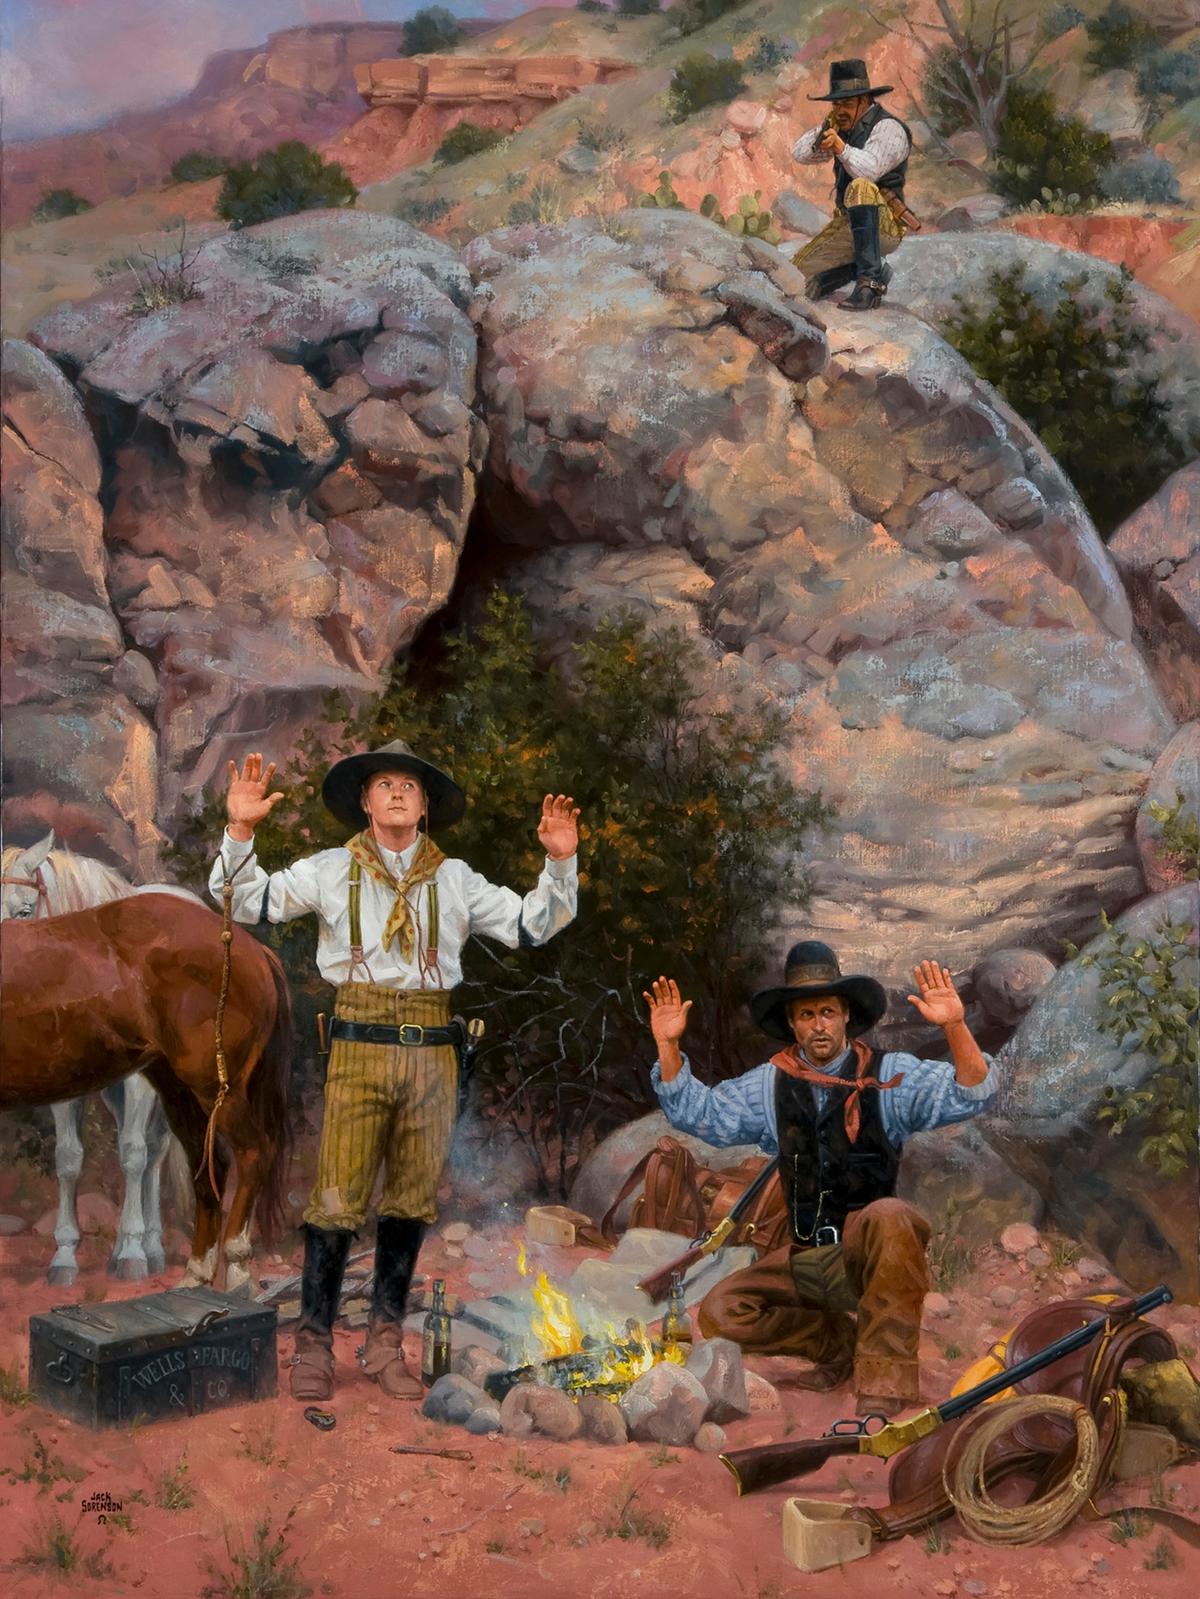 "Easy to Come By, Hard to Get Away With" by Jack Sorenson. (Courtesy of <a href="https://www.instagram.com/jacksorensonfineartactual/">©Jack Sorenson Fine Art, Inc</a>)